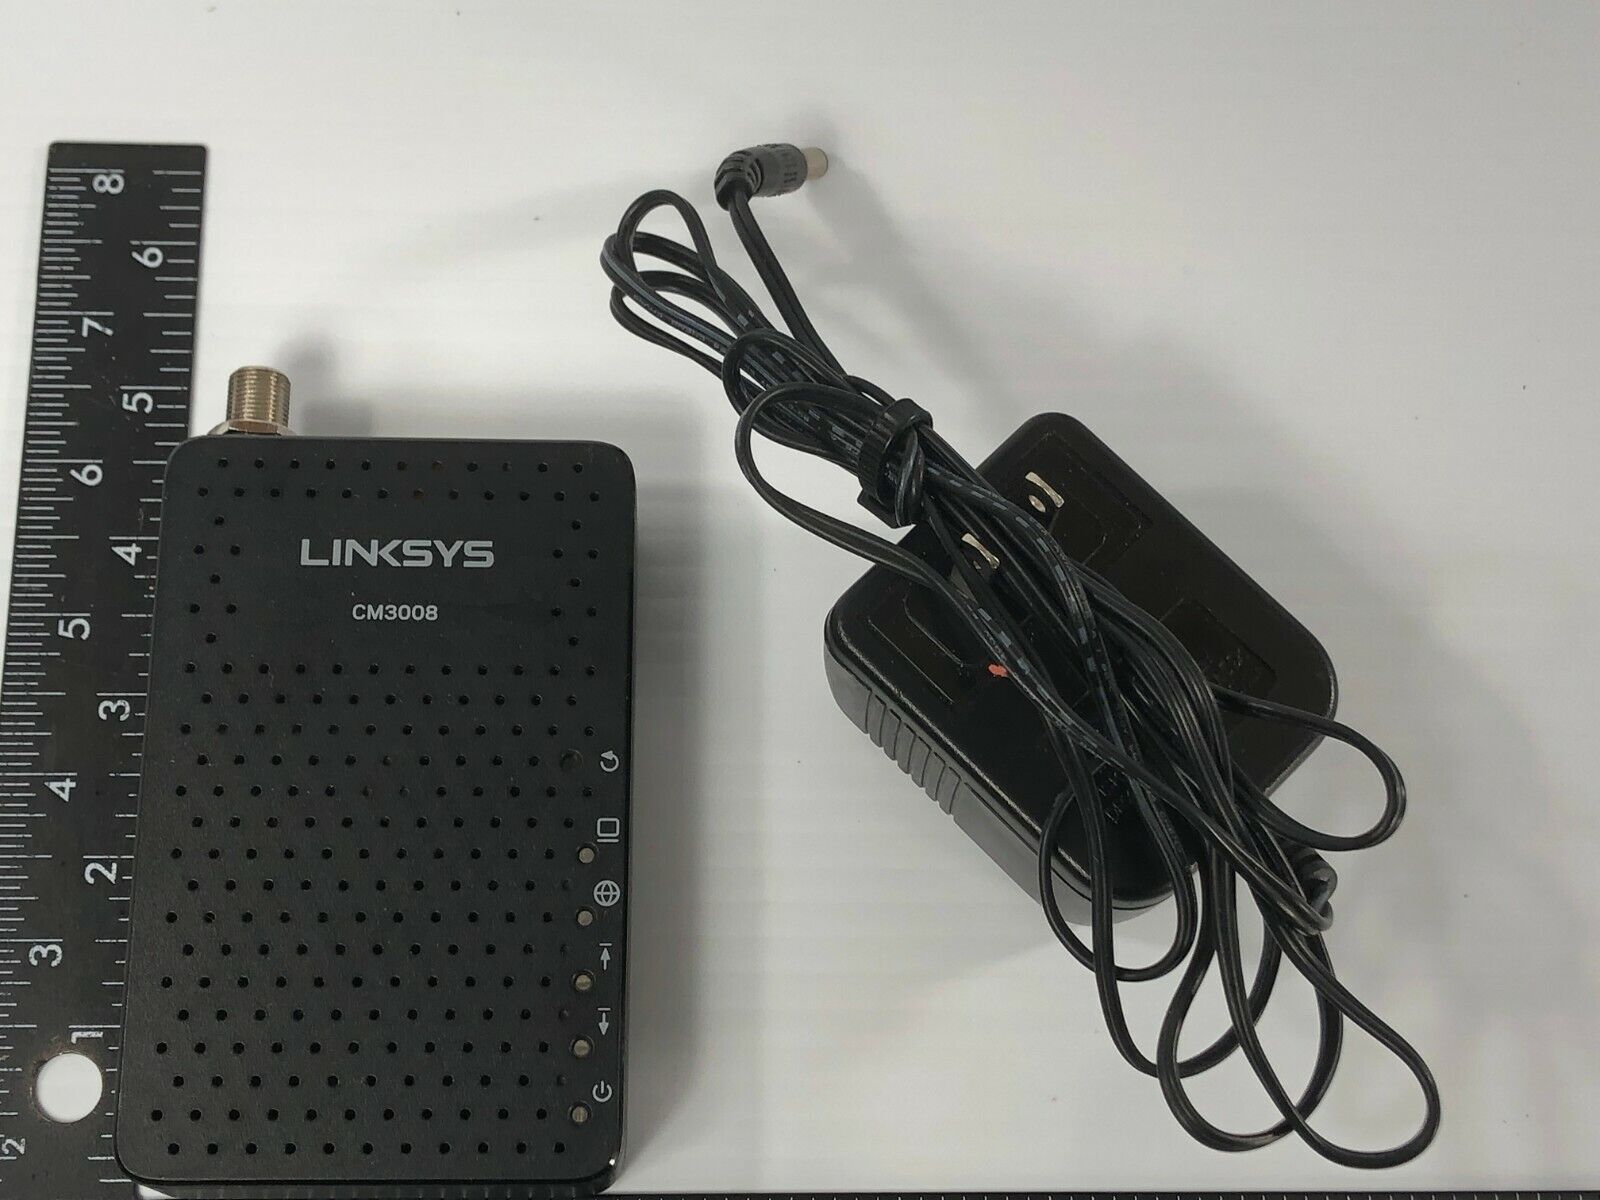 Linksys CM3008 cable modem DOCSIS 3.0 8x4 with power adapter